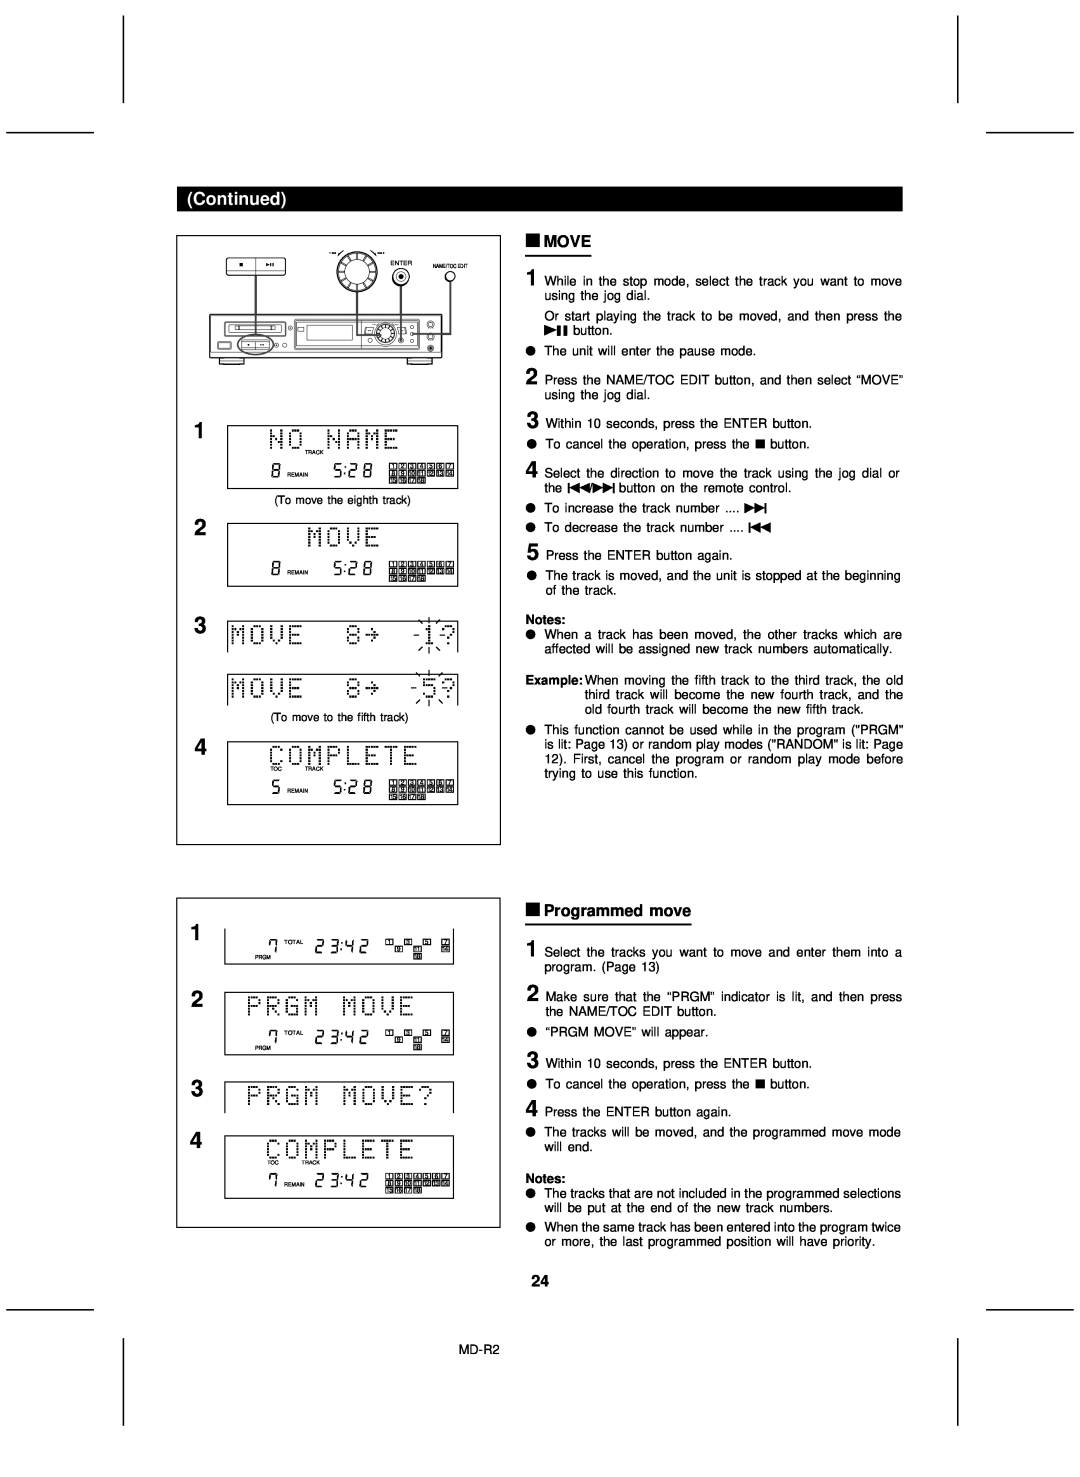 Kenwood MD-R2 operation manual 1 2 3 4, Move, Programmed move, Continued 